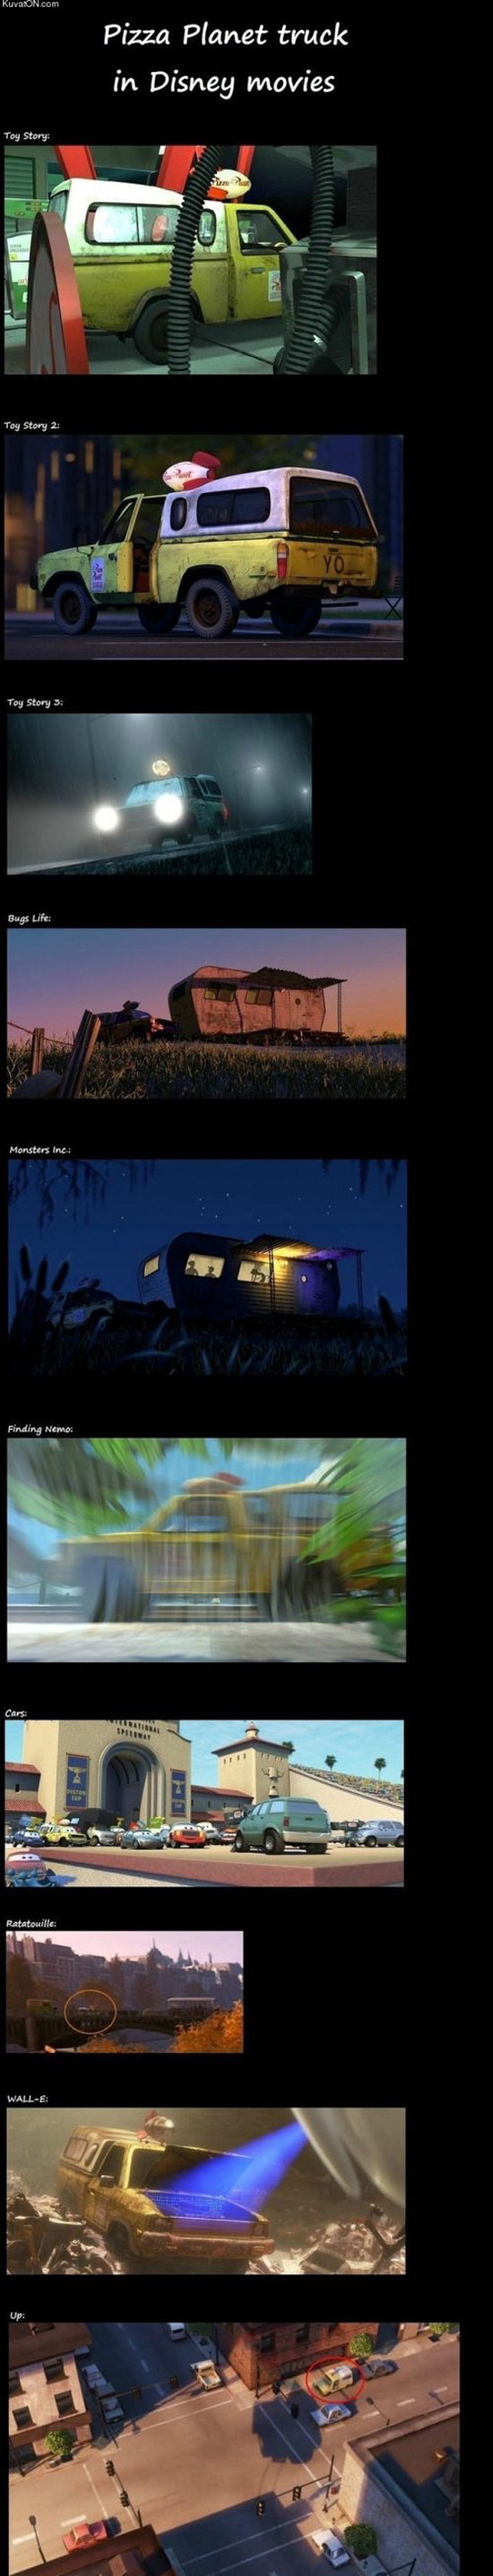 pizza planet truck in disney movies 4832